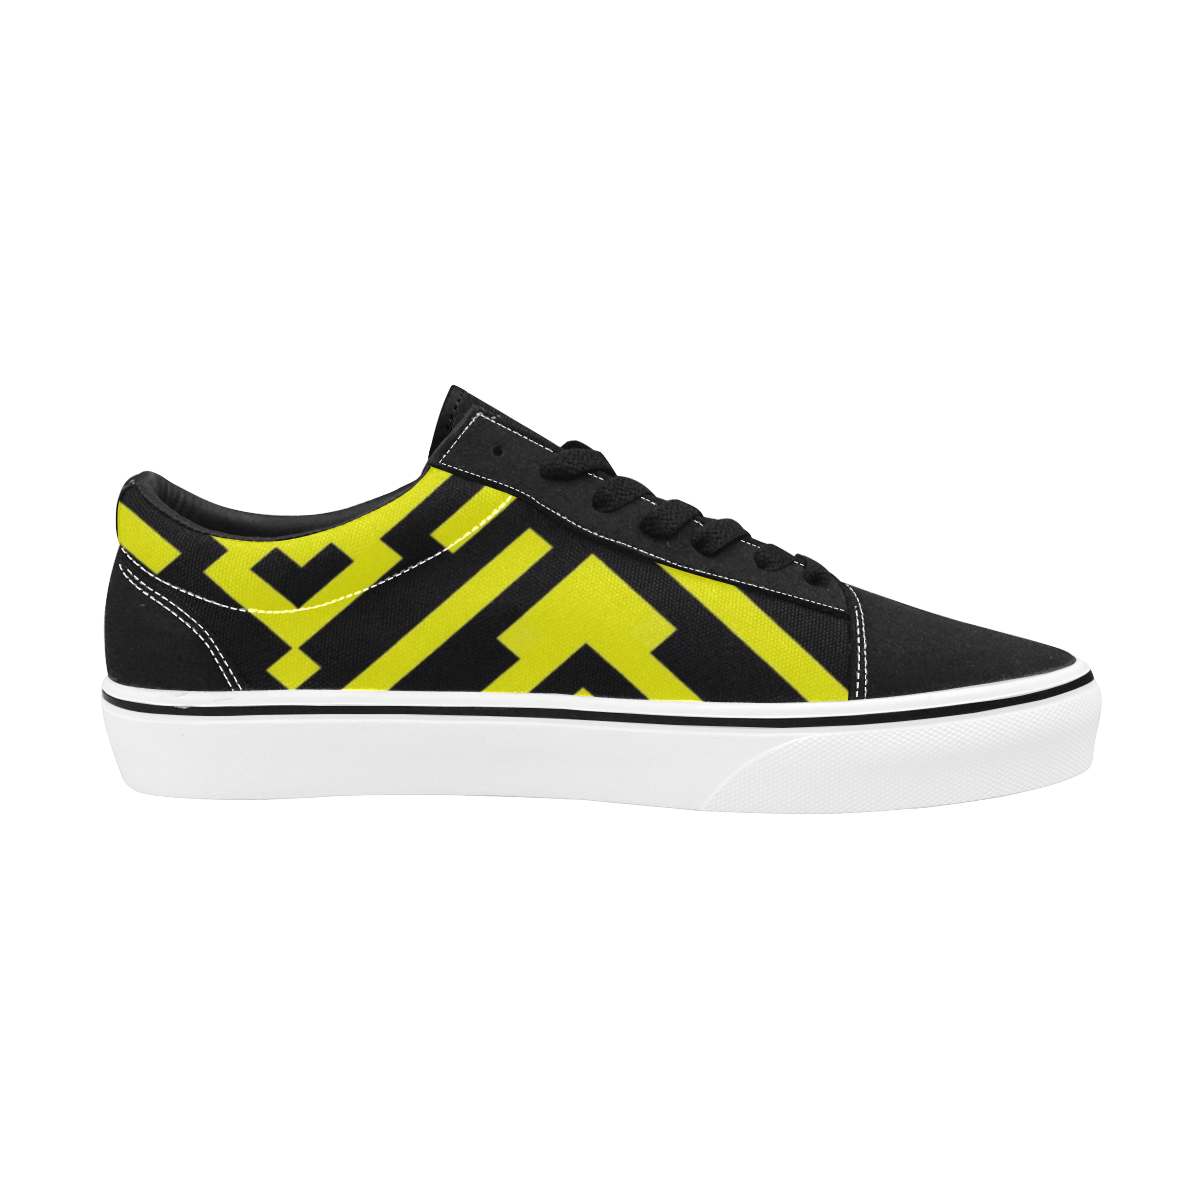 Black and Yellow Abstract Men's Low Top Skateboarding Shoes (Model E001-2)